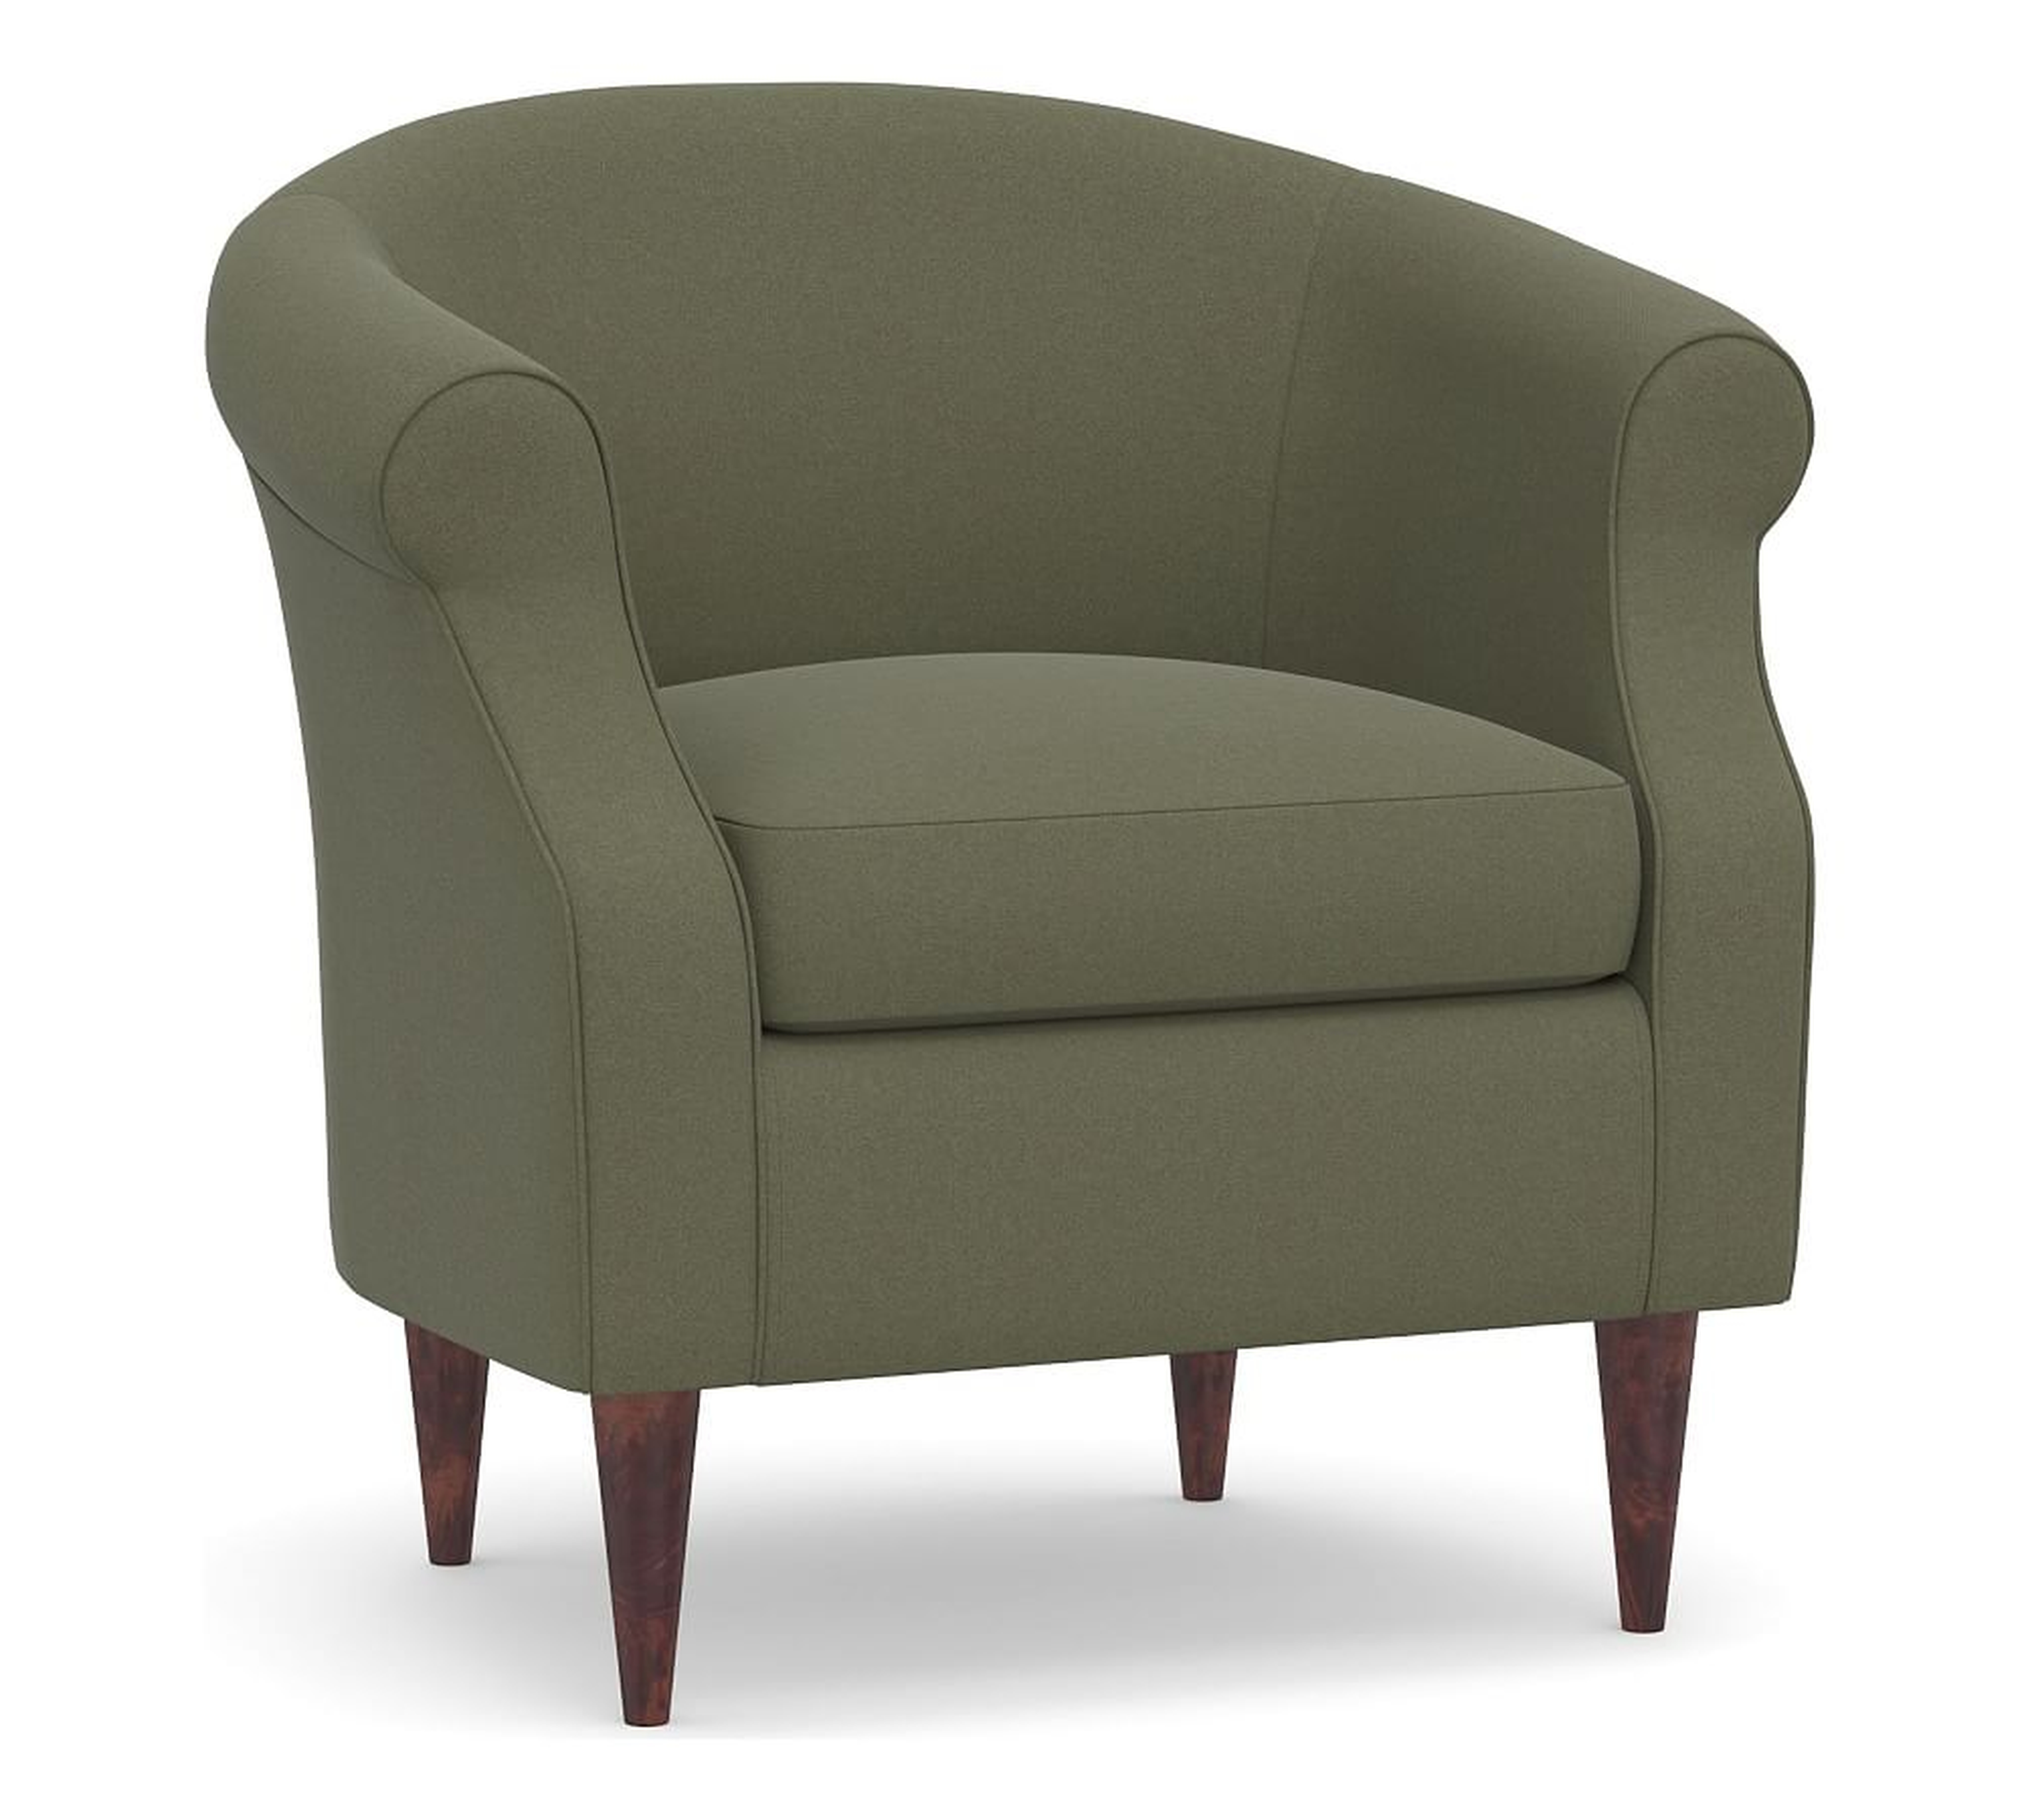 SoMa Lyndon Upholstered Armchair, Polyester Wrapped Cushions, Performance Heathered Velvet Olive - Pottery Barn